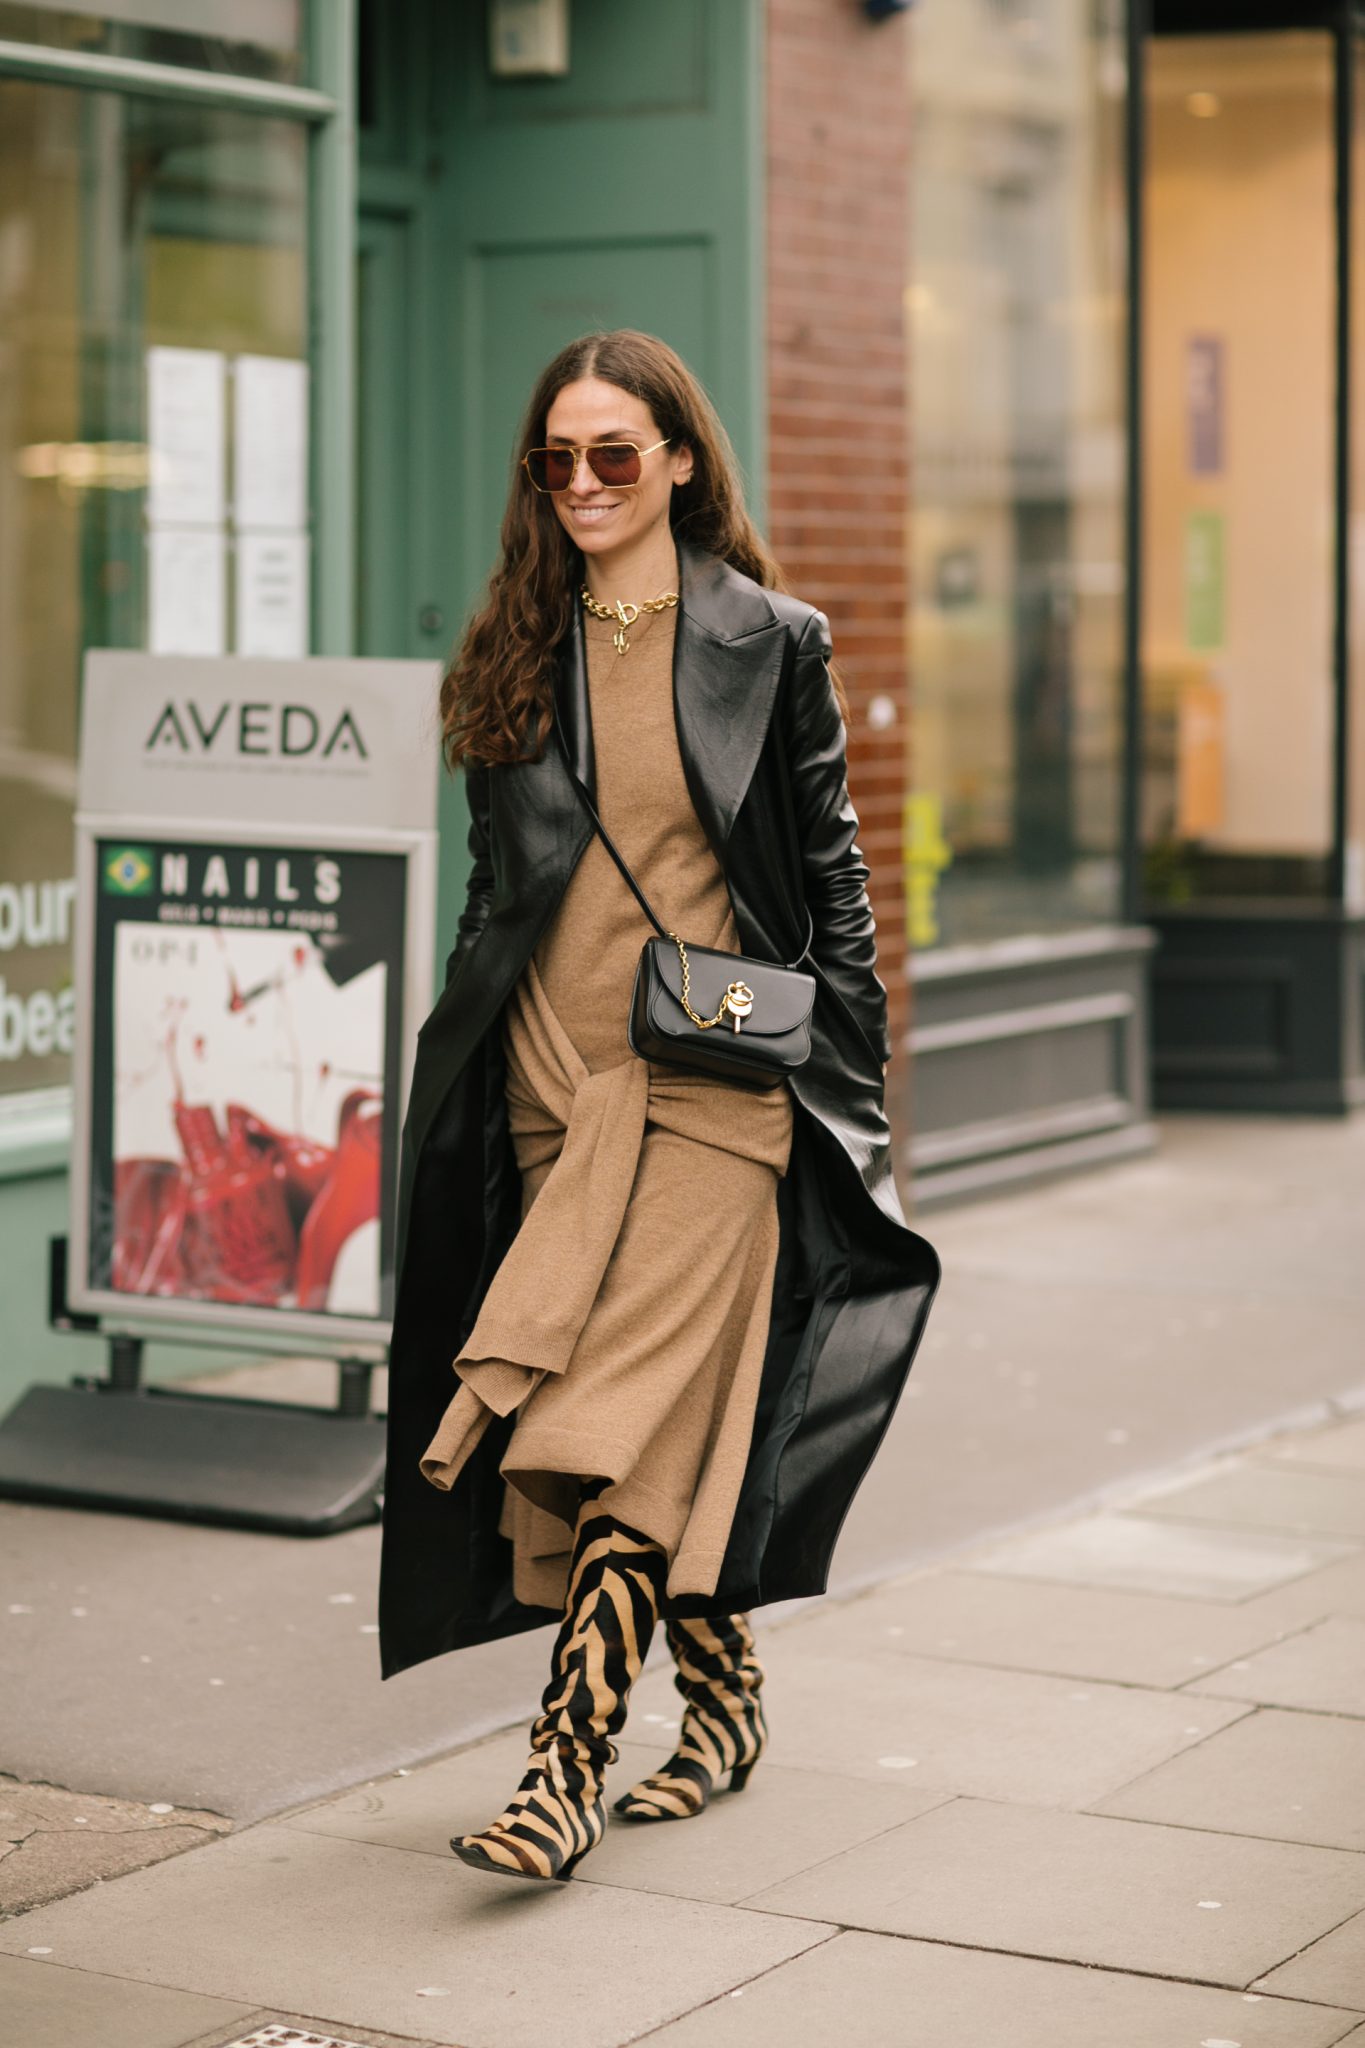 London Fashion Week: the coolest street style looks from the capital ...